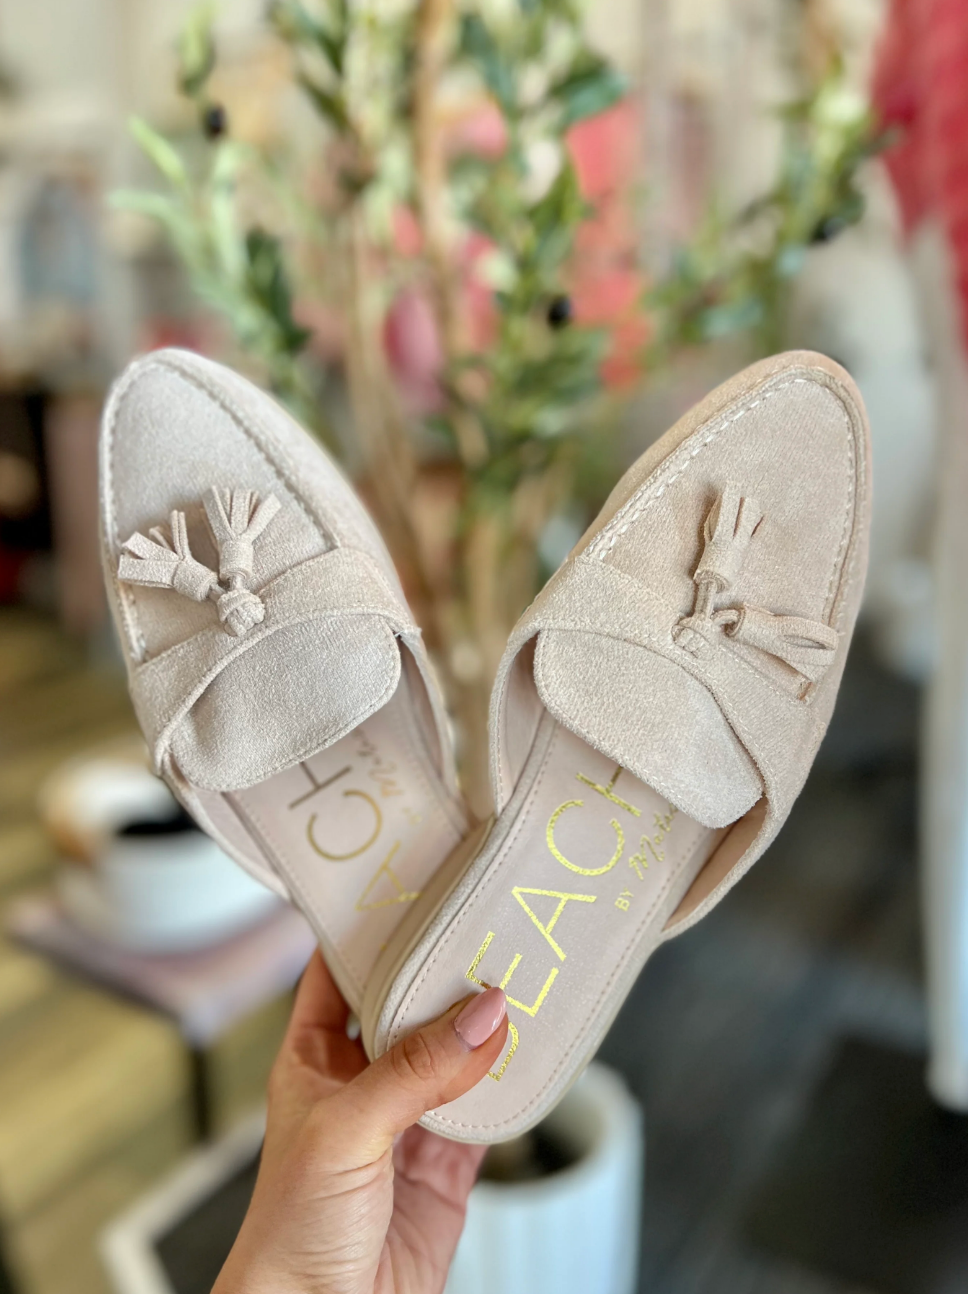 Matisse Tyra Natural Loafer Mule